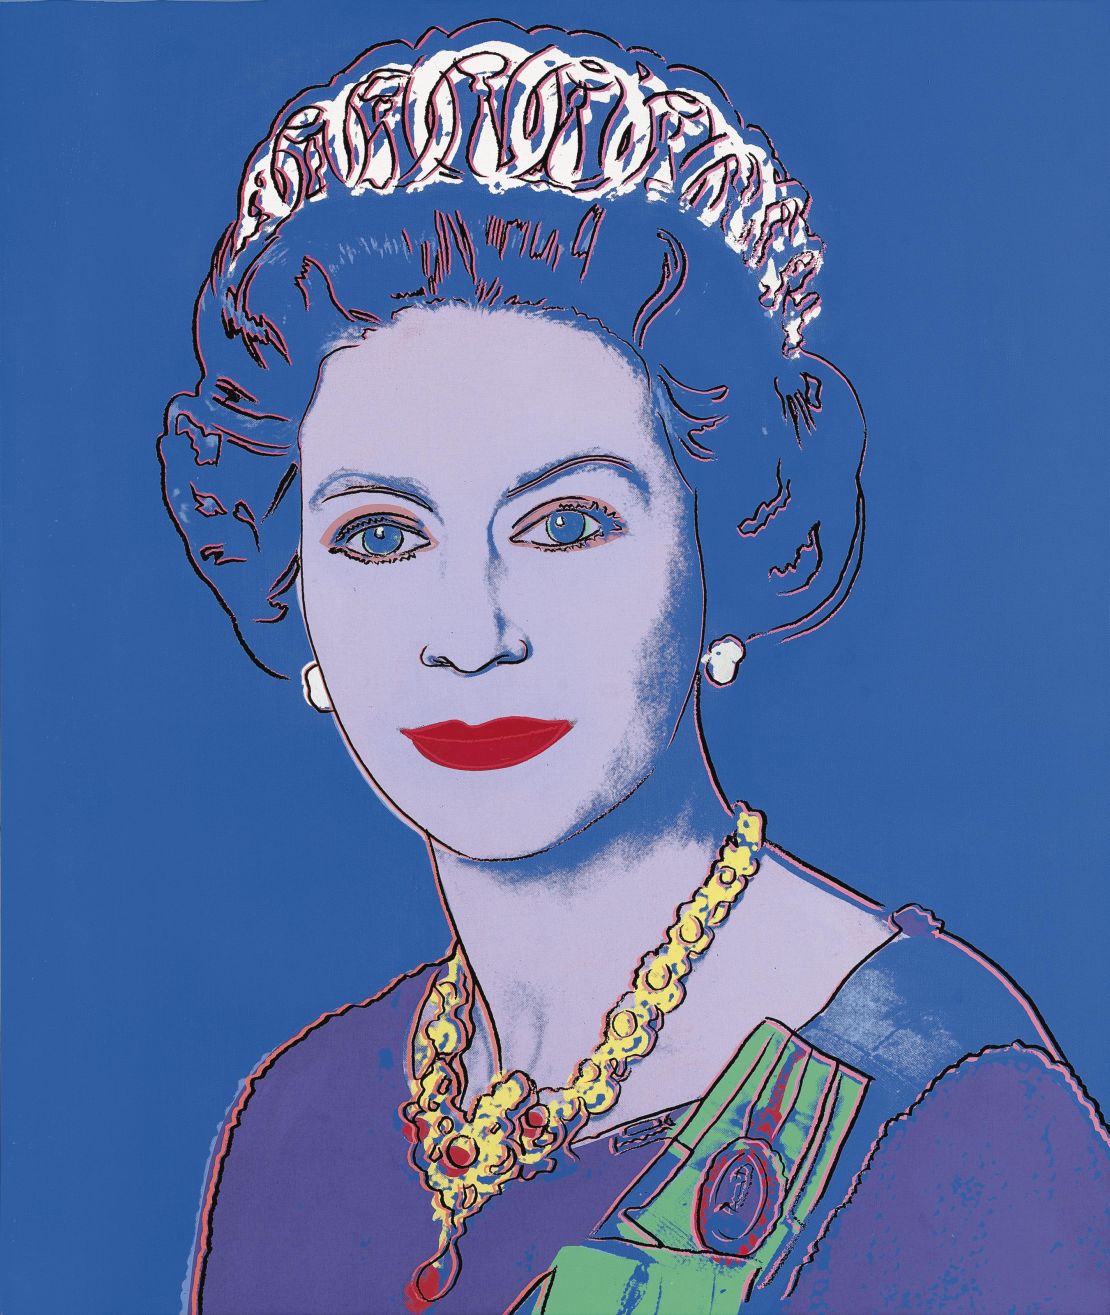 Andy Warhol's 1985 "Reigning Queens" portrait.